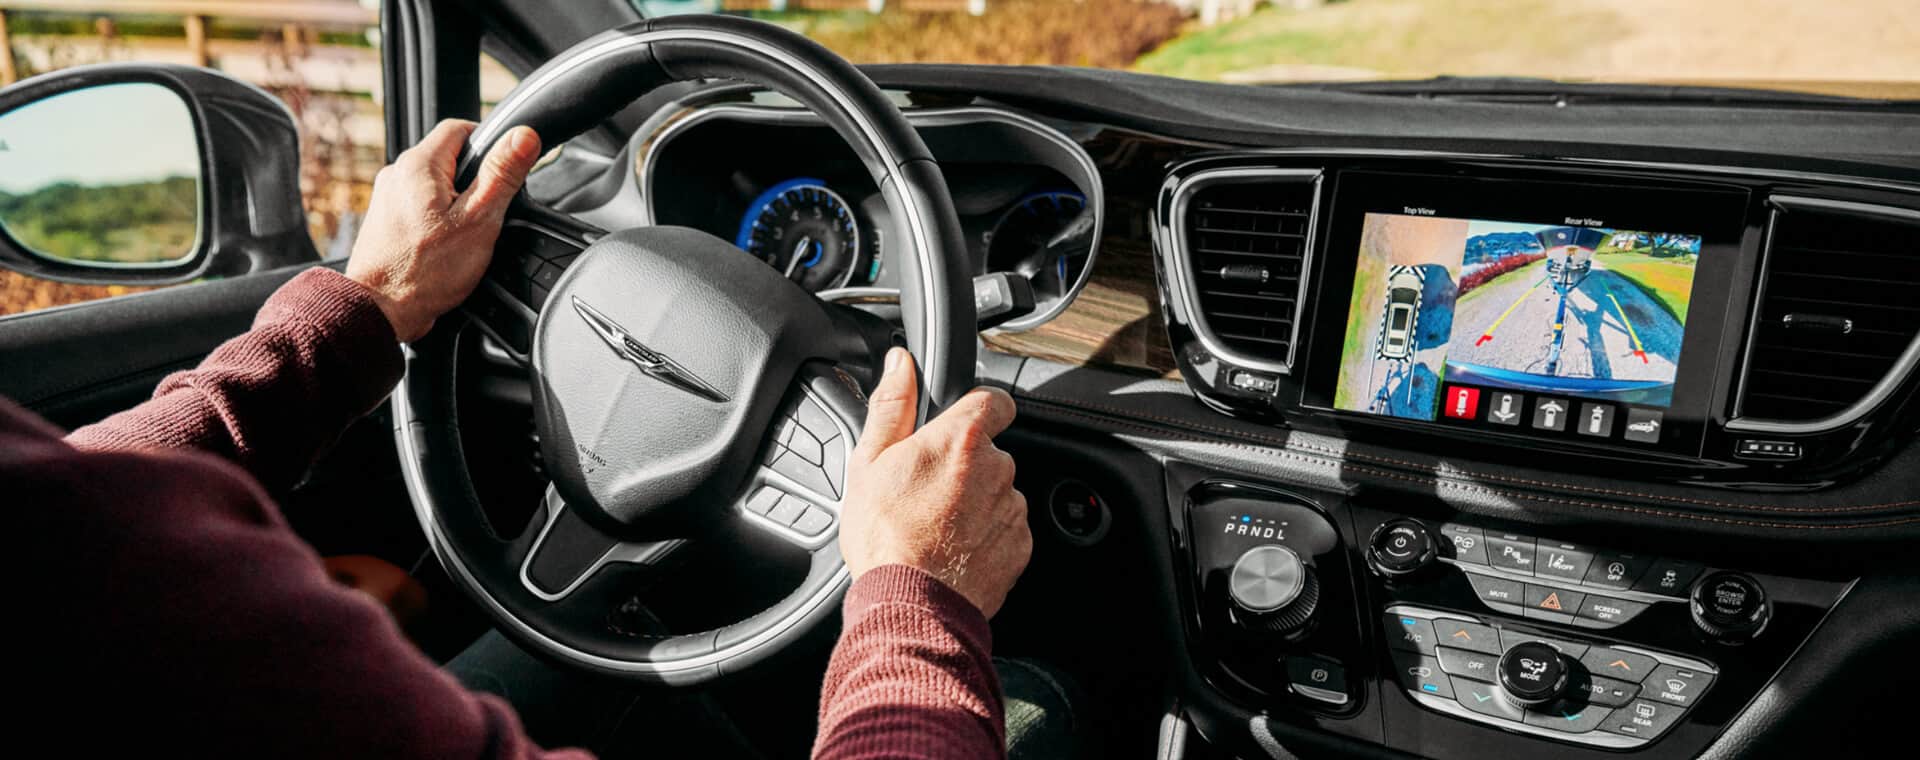 The driver of a 2021 Chrysler Brand vehicle watching the road while keeping his hands on the steering wheel.